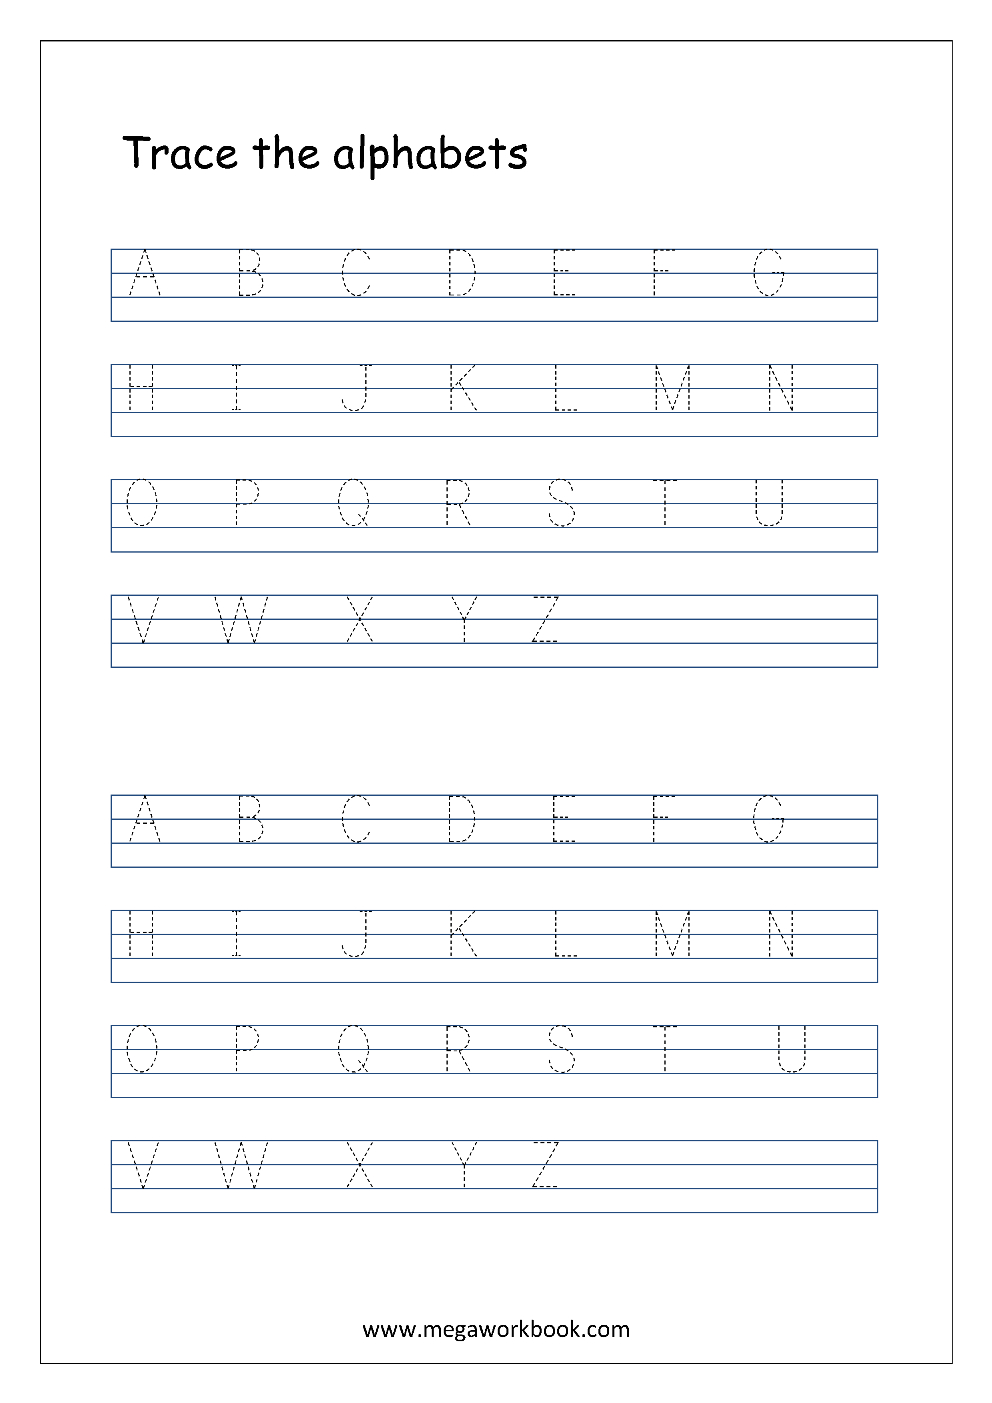 English Worksheet - Alphabet Tracing In 4 Lines - Capital throughout Tracing Capital Letters Worksheets Pdf